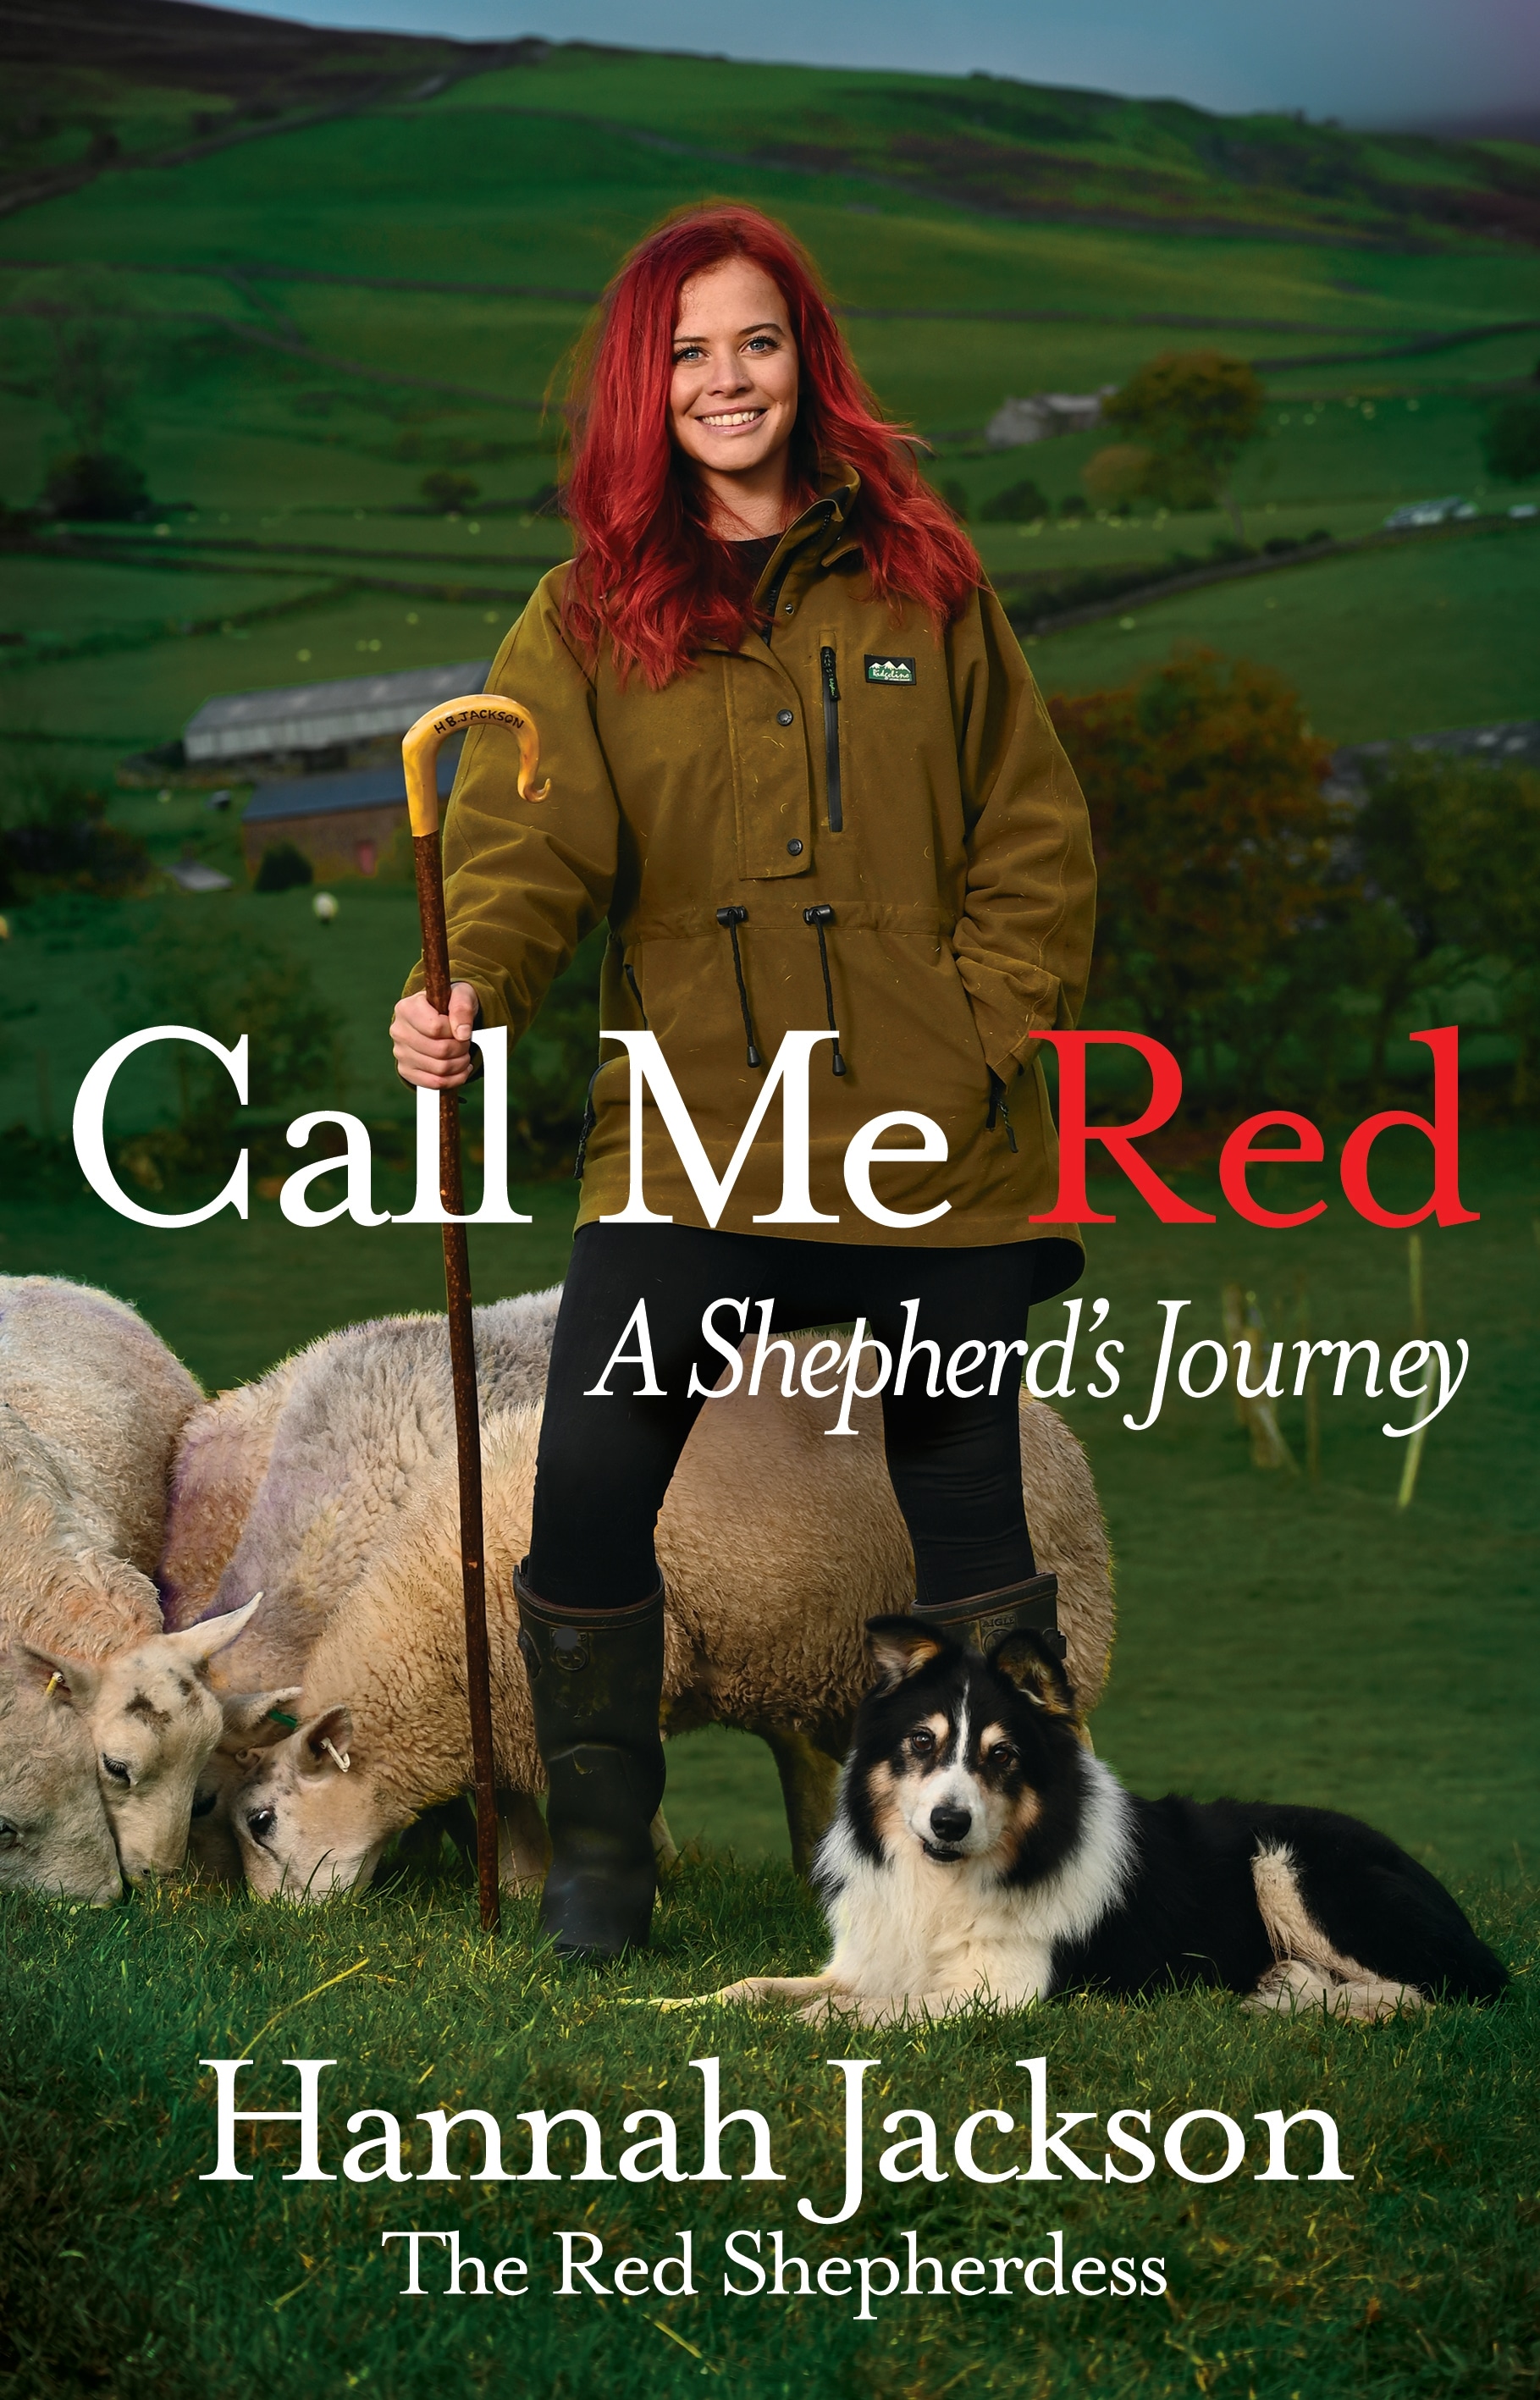 Book “Call Me Red” by Hannah Jackson — March 4, 2021